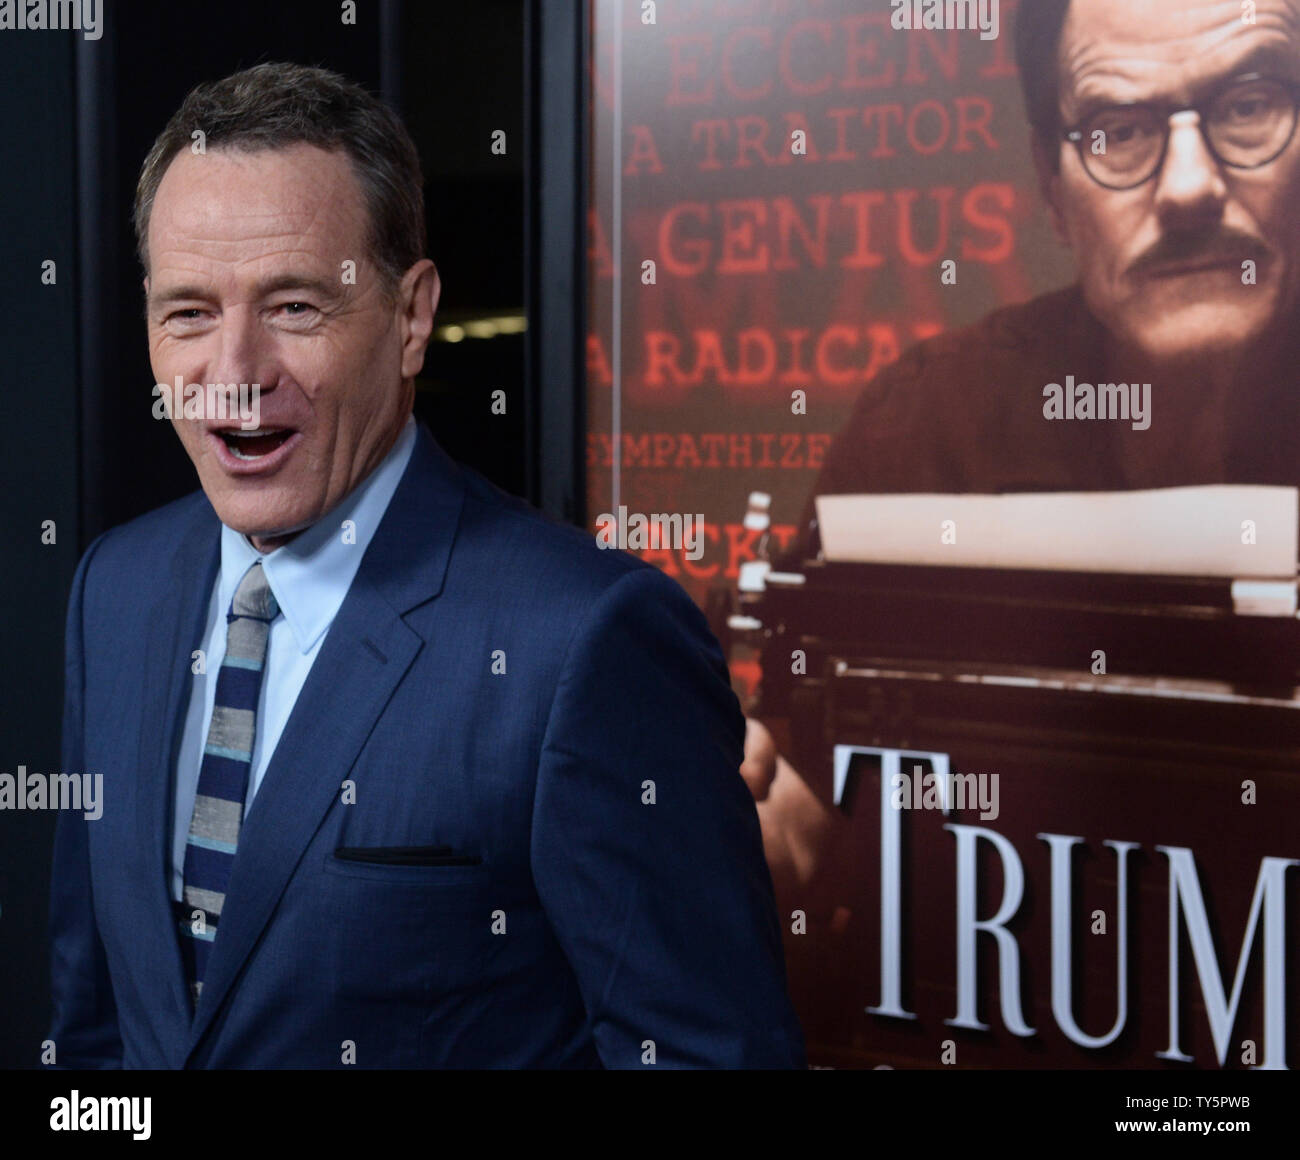 Cast member Bryan Cranston attends the premiere of the motion picture biographical drama 'Trumbo' at the Academy of Motion Picture Arts & Sciences in Beverly Hills, California on October 27, 2015. Storyline: In 1947, Dalton Trumbo was Hollywood's top screenwriter until he and other artists were jailed and blacklisted for their political beliefs. The film recounts how Dalton used words and wit to win two Academy Awards and expose the absurdity and injustice under the blacklist, which entangled everyone from gossip columnist Hedda Hopper to John Wayne, Kirk Douglas and Otto Preminger.  Photo by Stock Photo